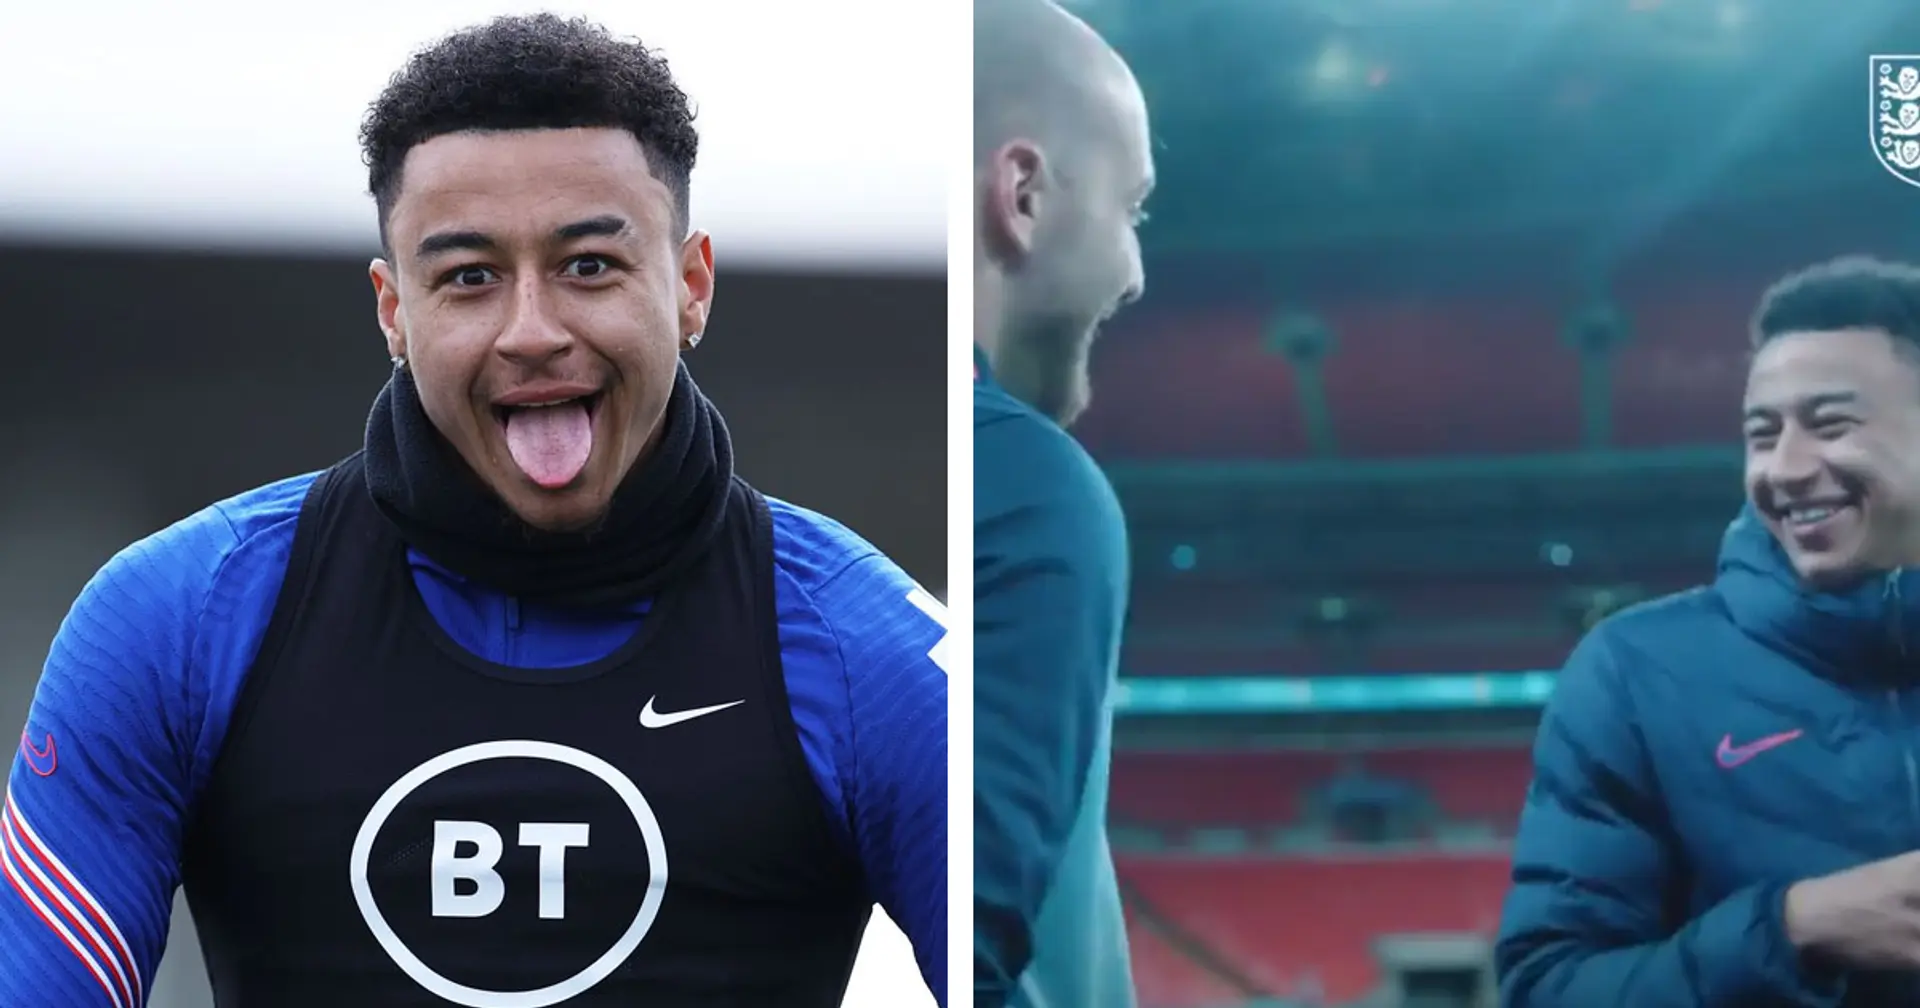 ‘I had seven shots and you saved all of them!’: Lingard shares brilliant banter with San Marino goalkeeper